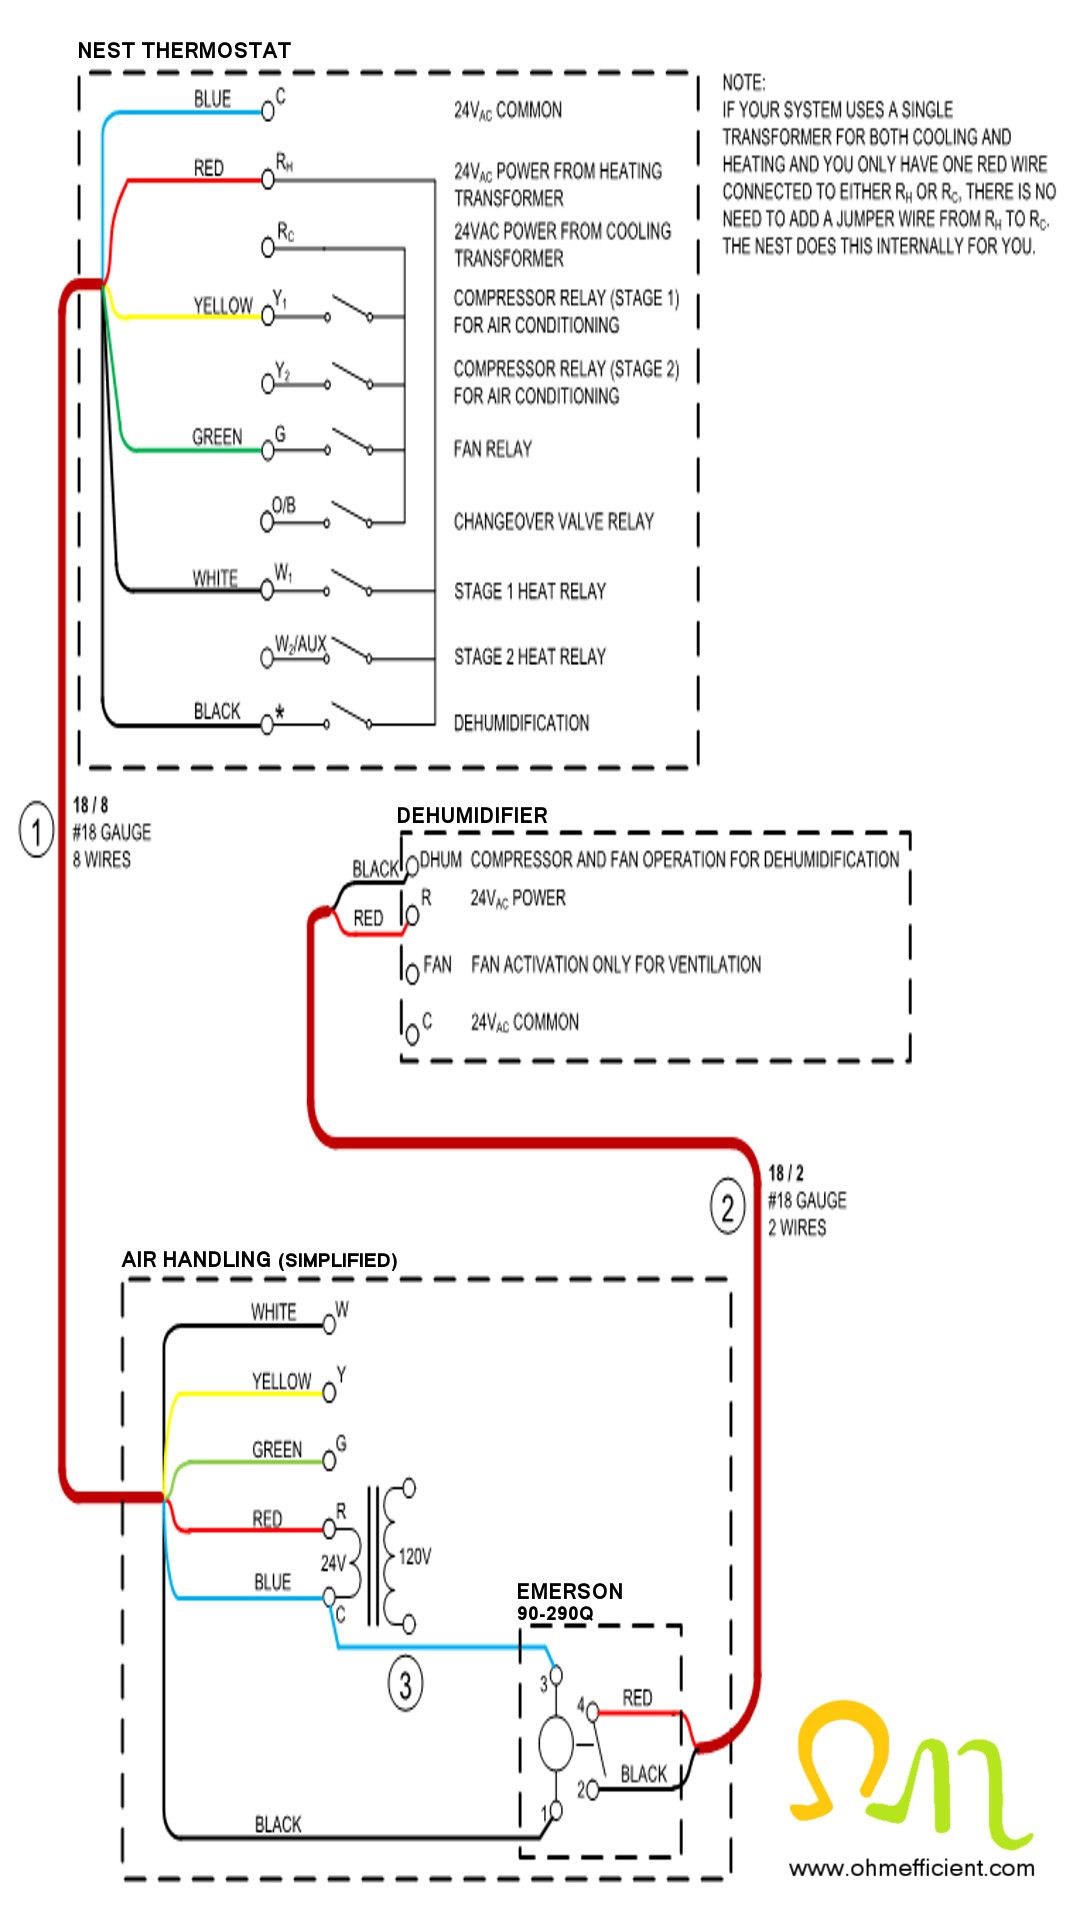 Nest Wiring Diagram Wiring Diagram For Ge Dehumidifier Wiring Diagram Project